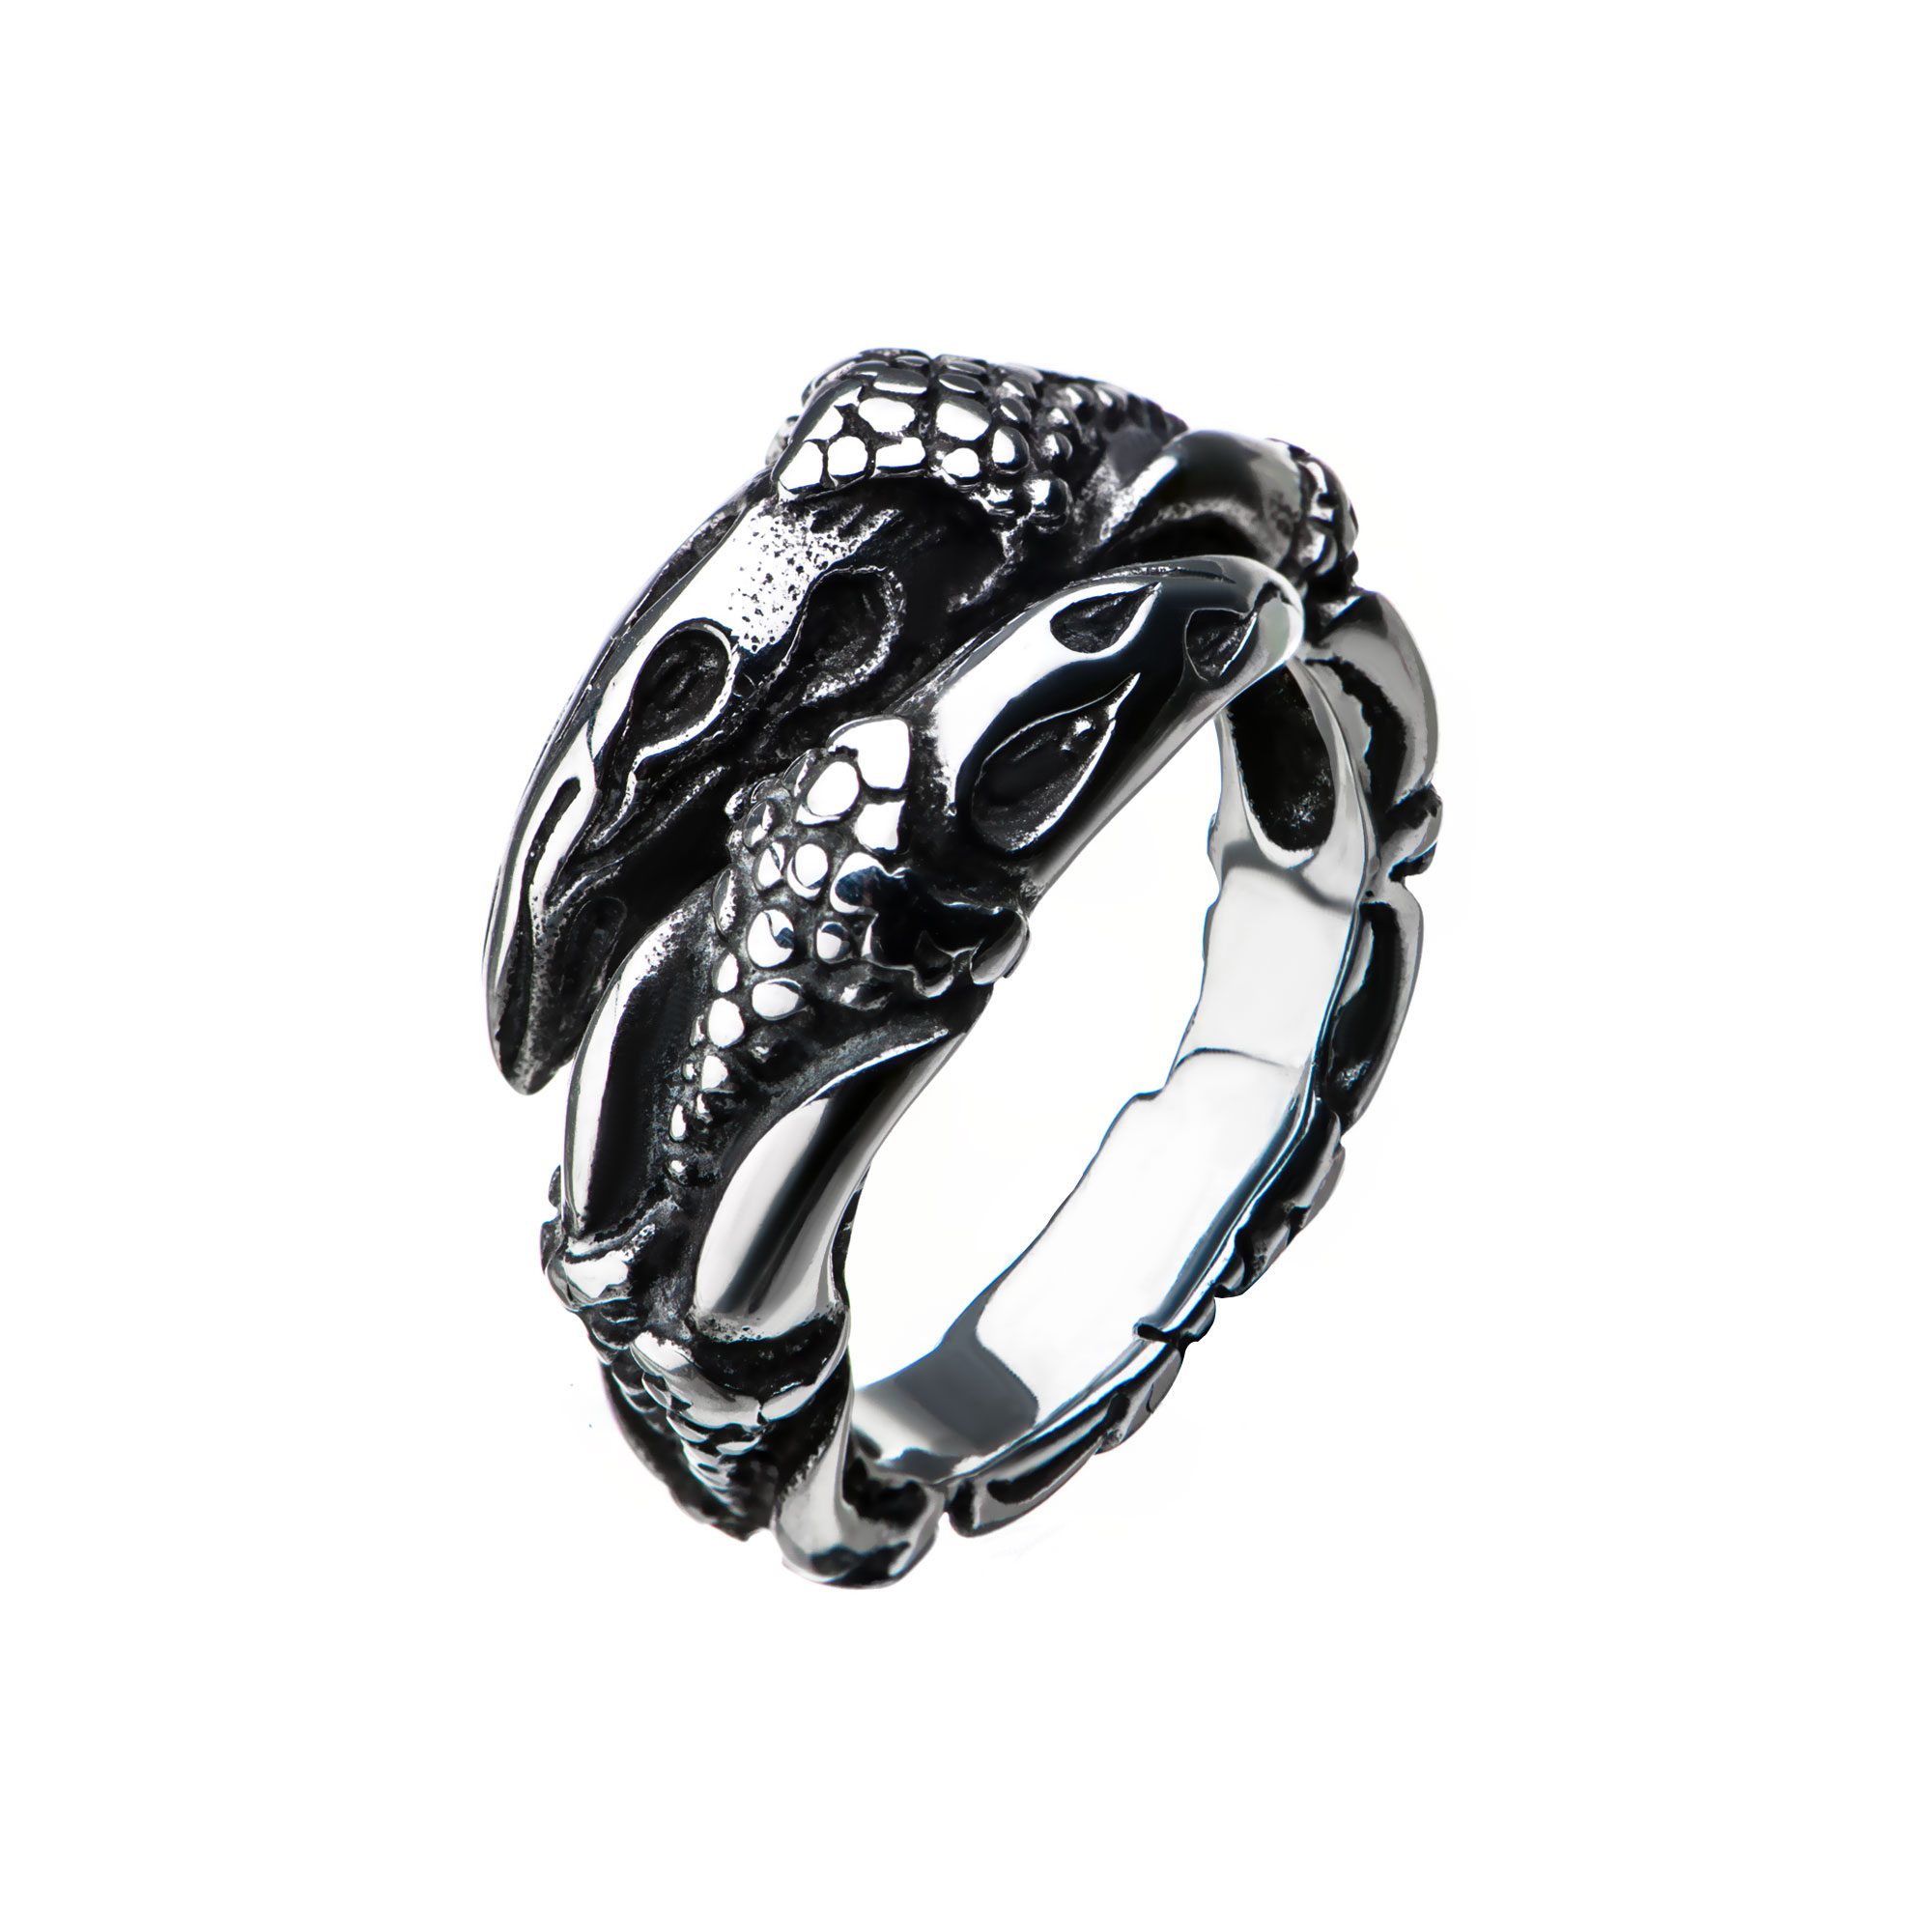 Steel & Black Plated Oxidized Claw Ring Lewis Jewelers, Inc. Ansonia, CT